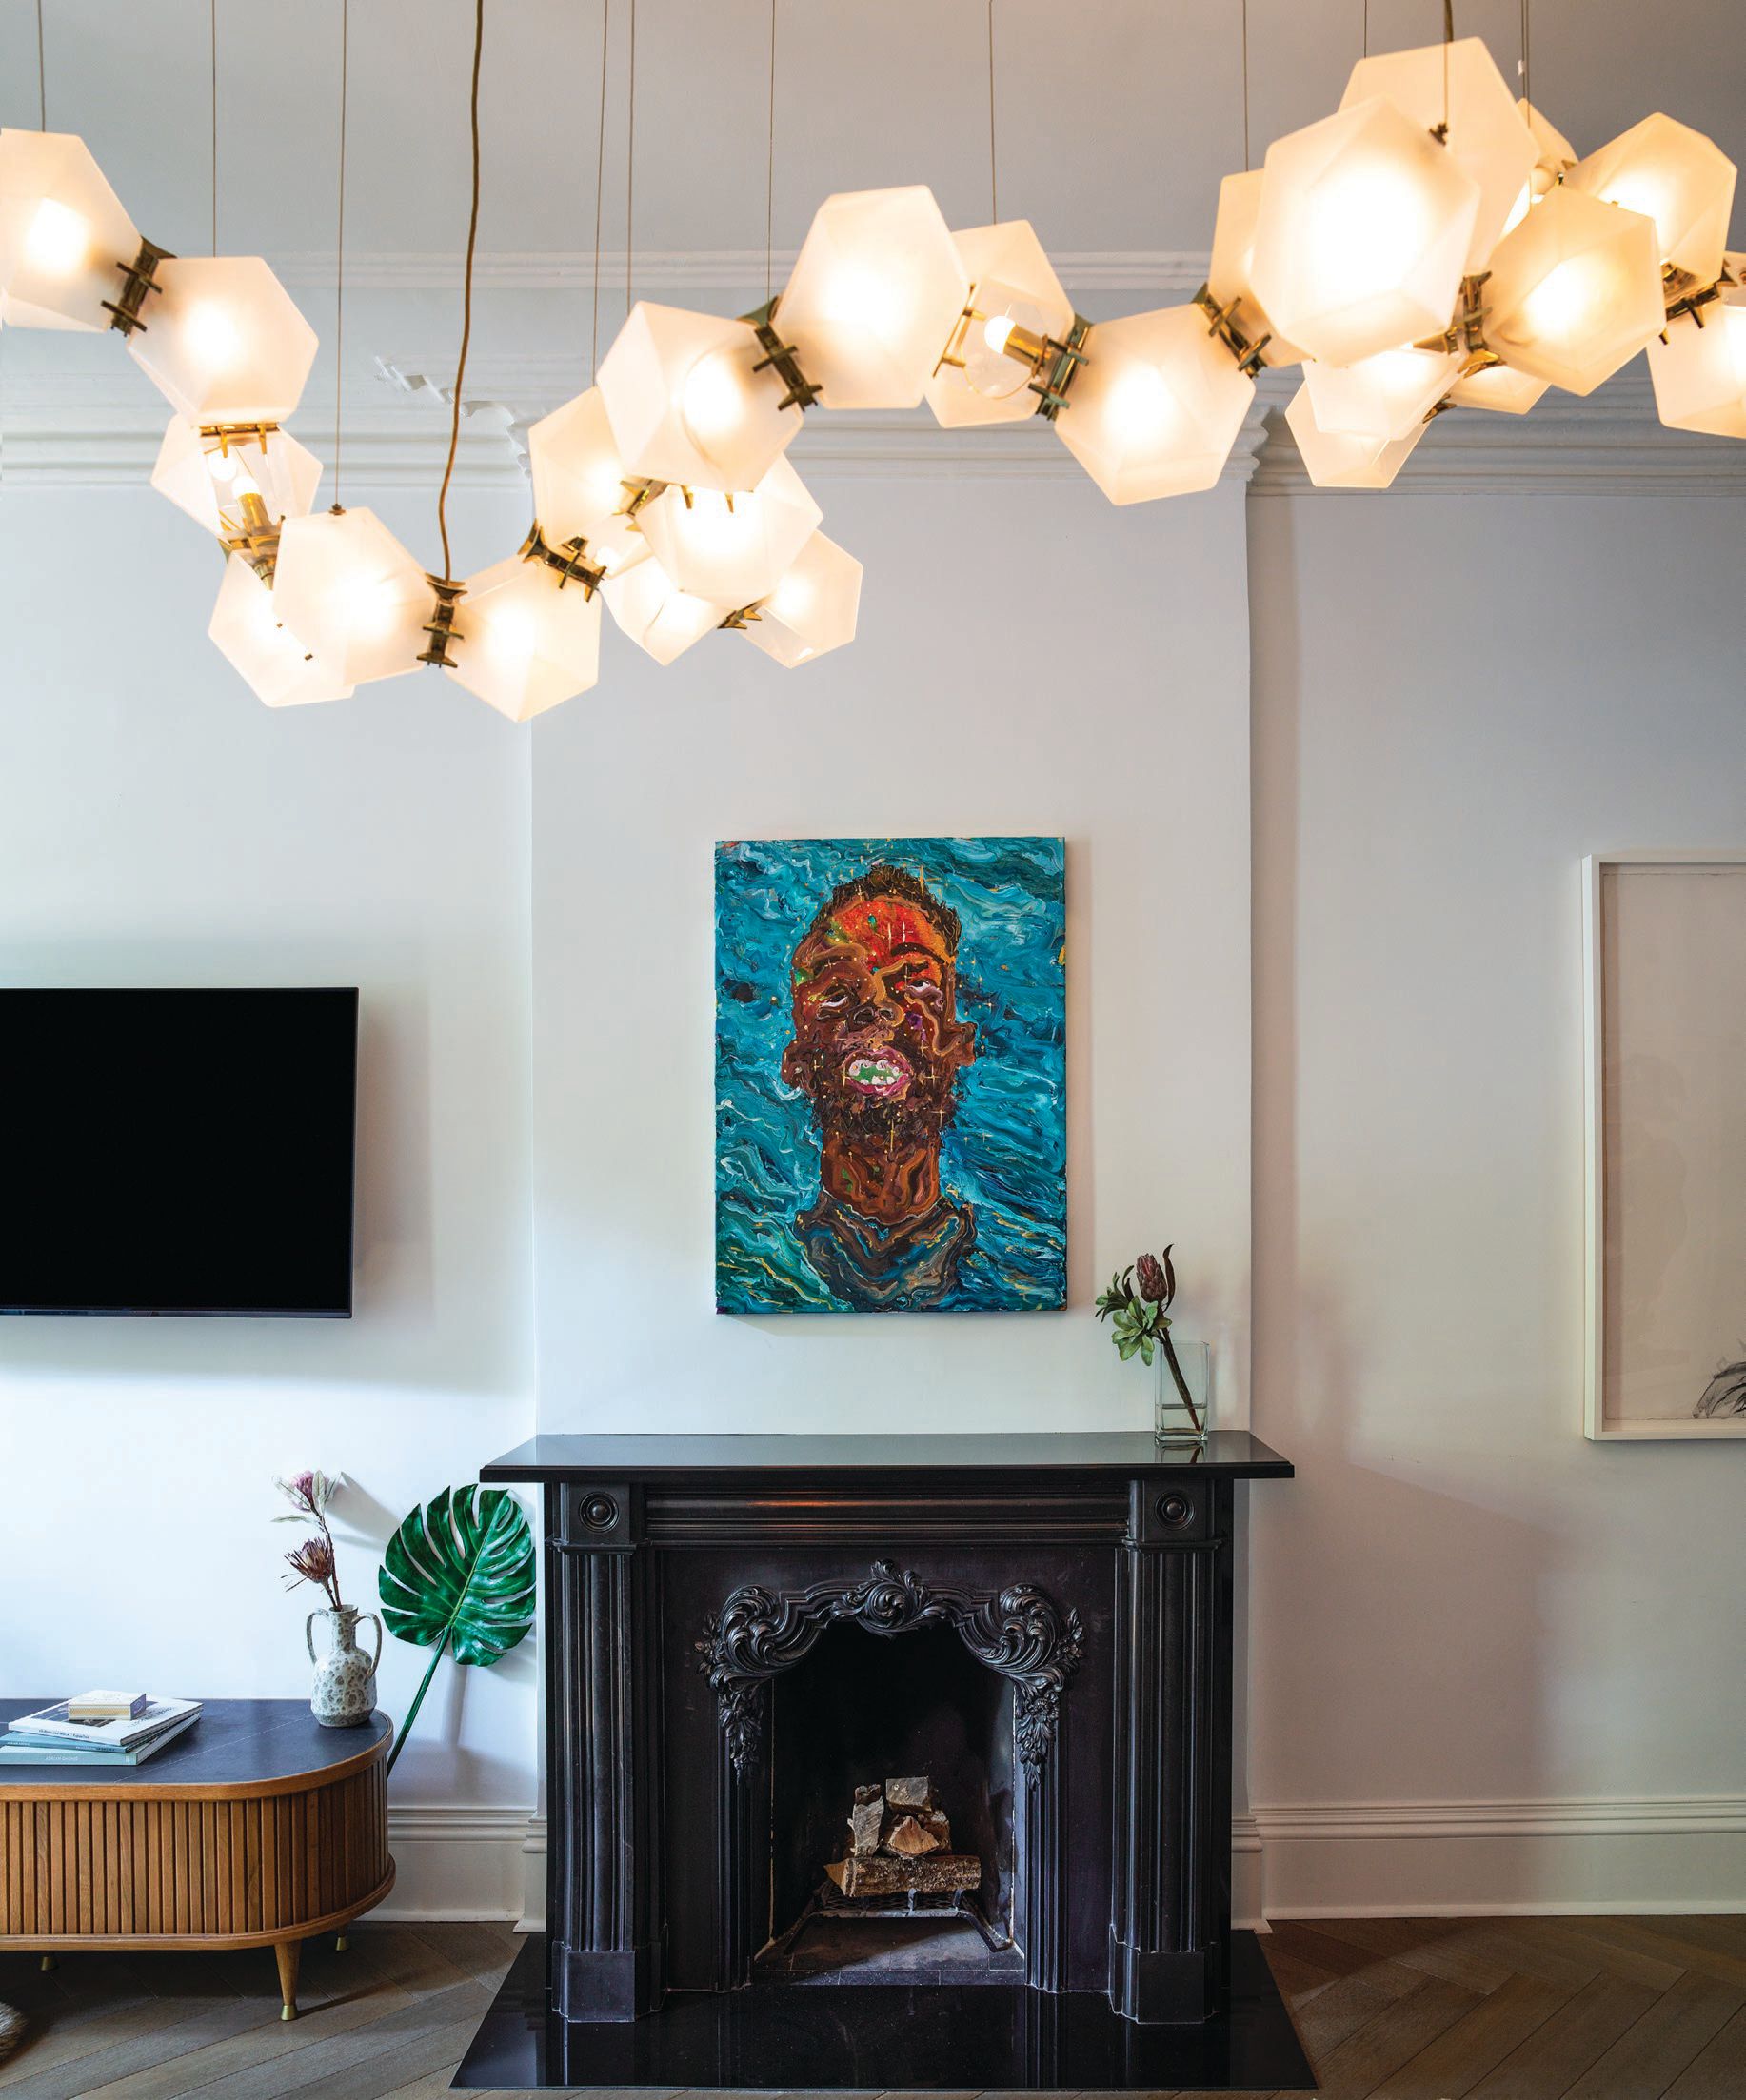 Ludovic Nkoth’s “Fallen Angel #1” (2020) hangs above the fireplace. Photographed by Frank Frances